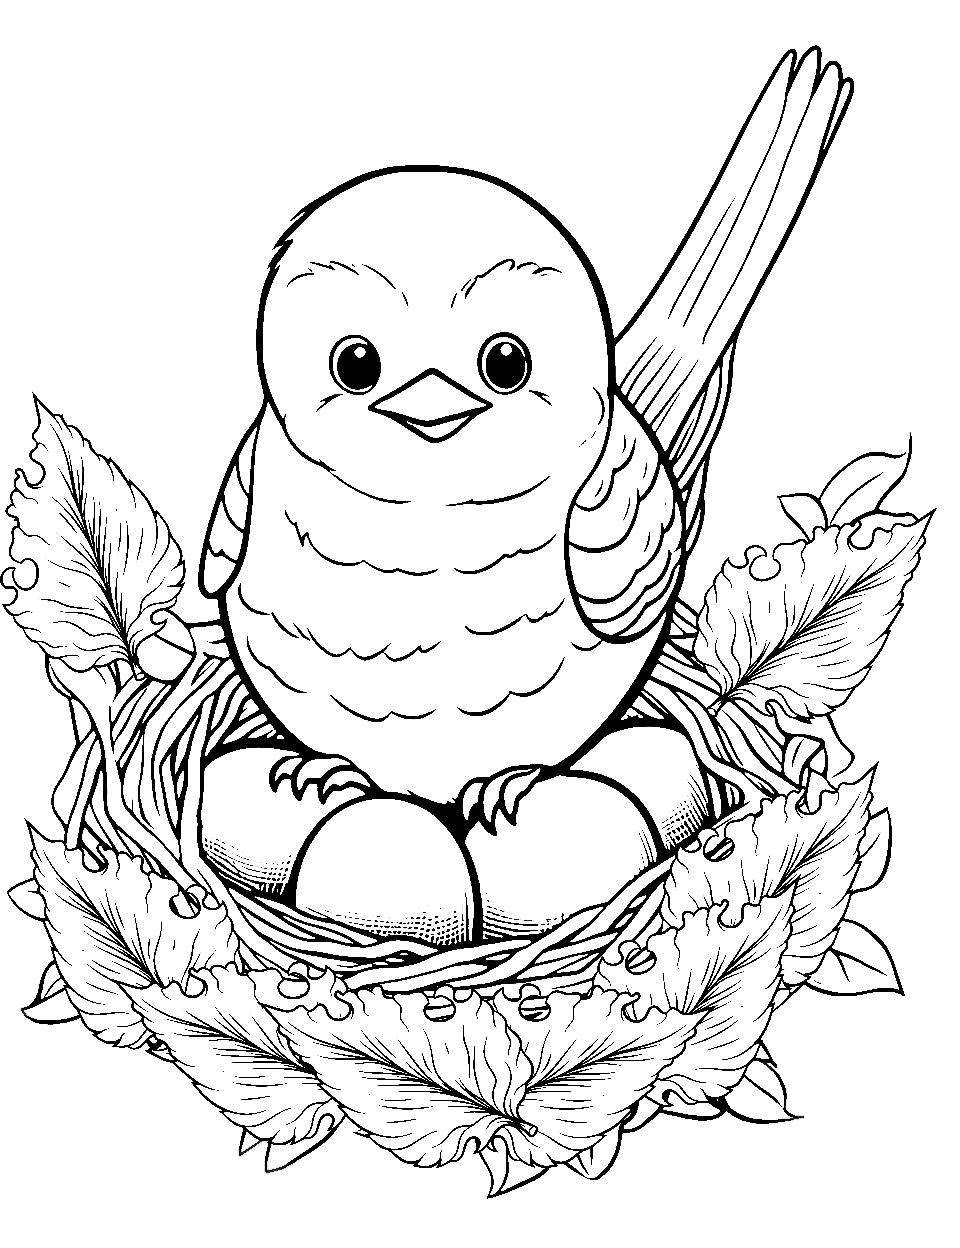 Nesting Birds Coloring Page - A bird sitting in a nest with eggs.